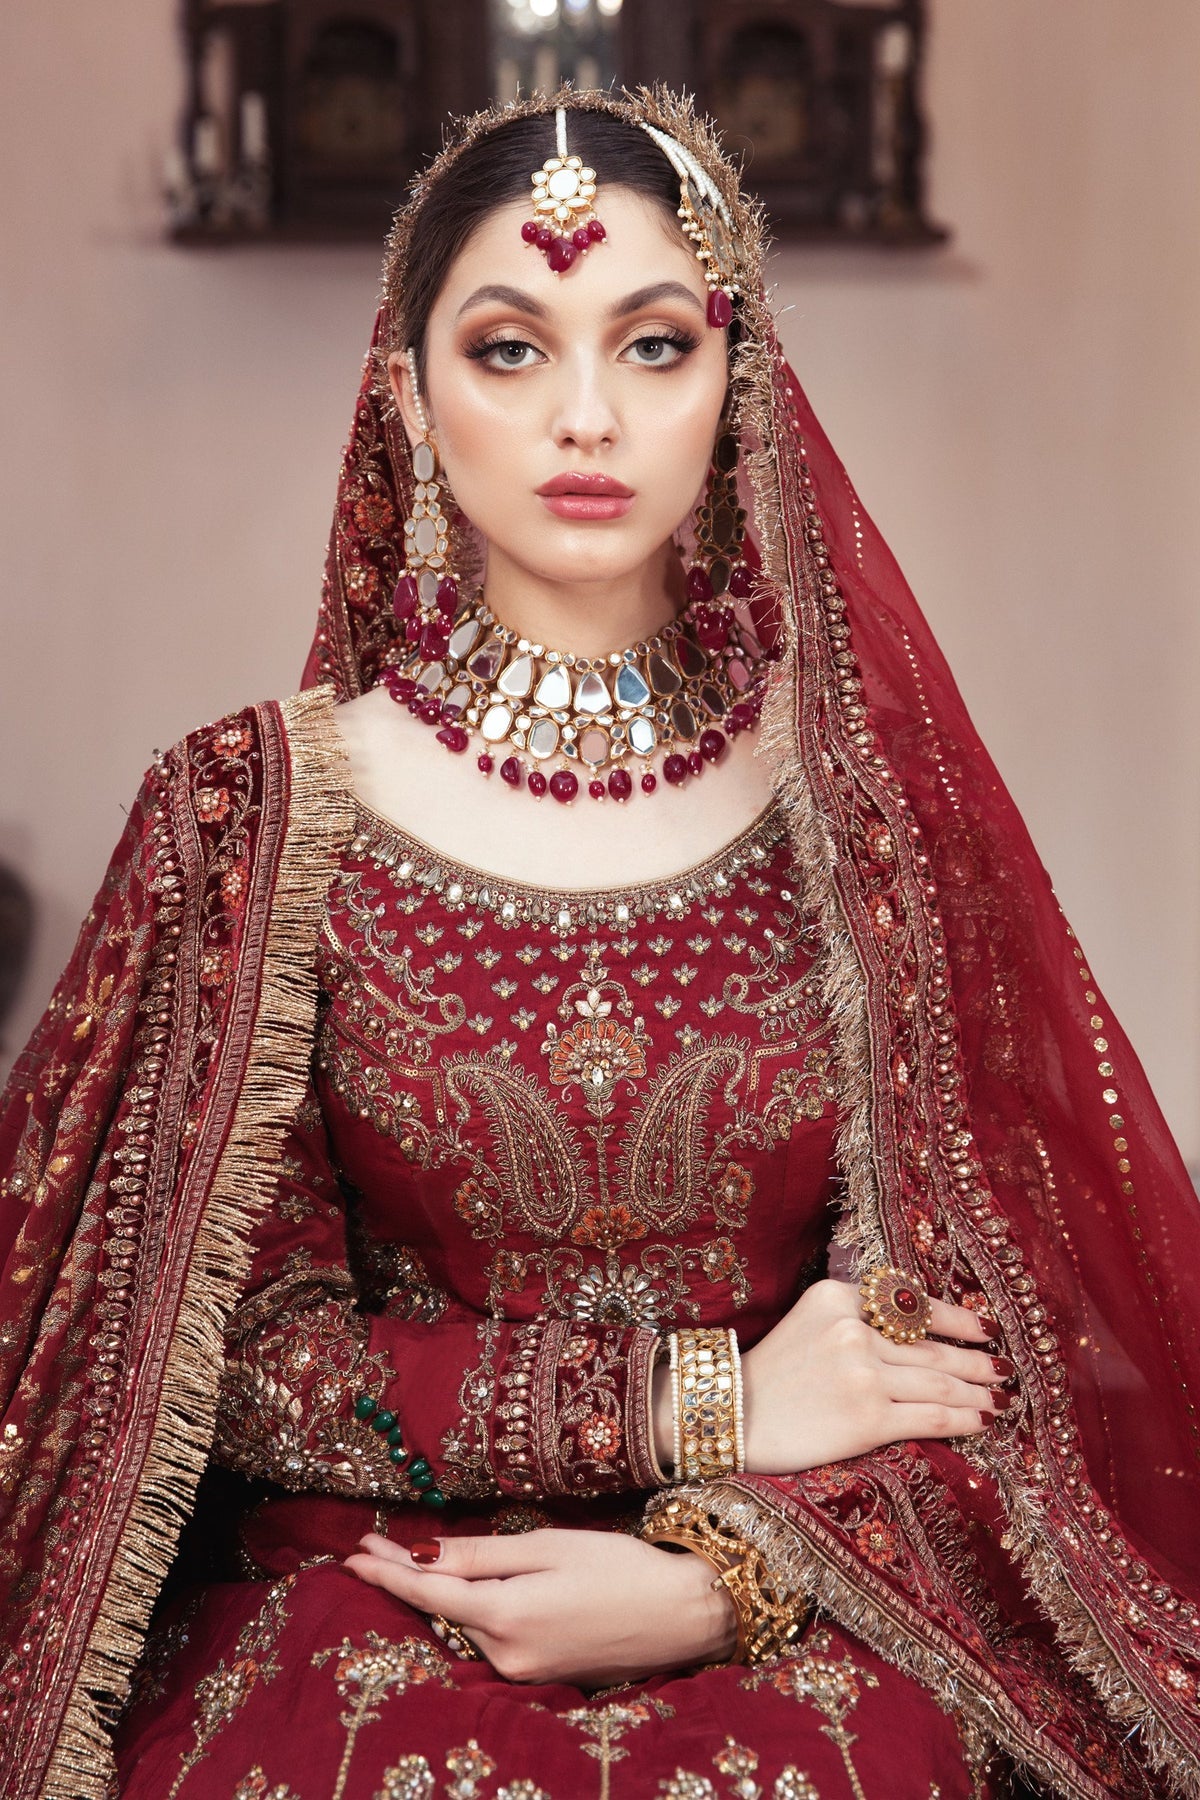 Shop heritage-inspired bridal lehengas from these designers | Vogue India